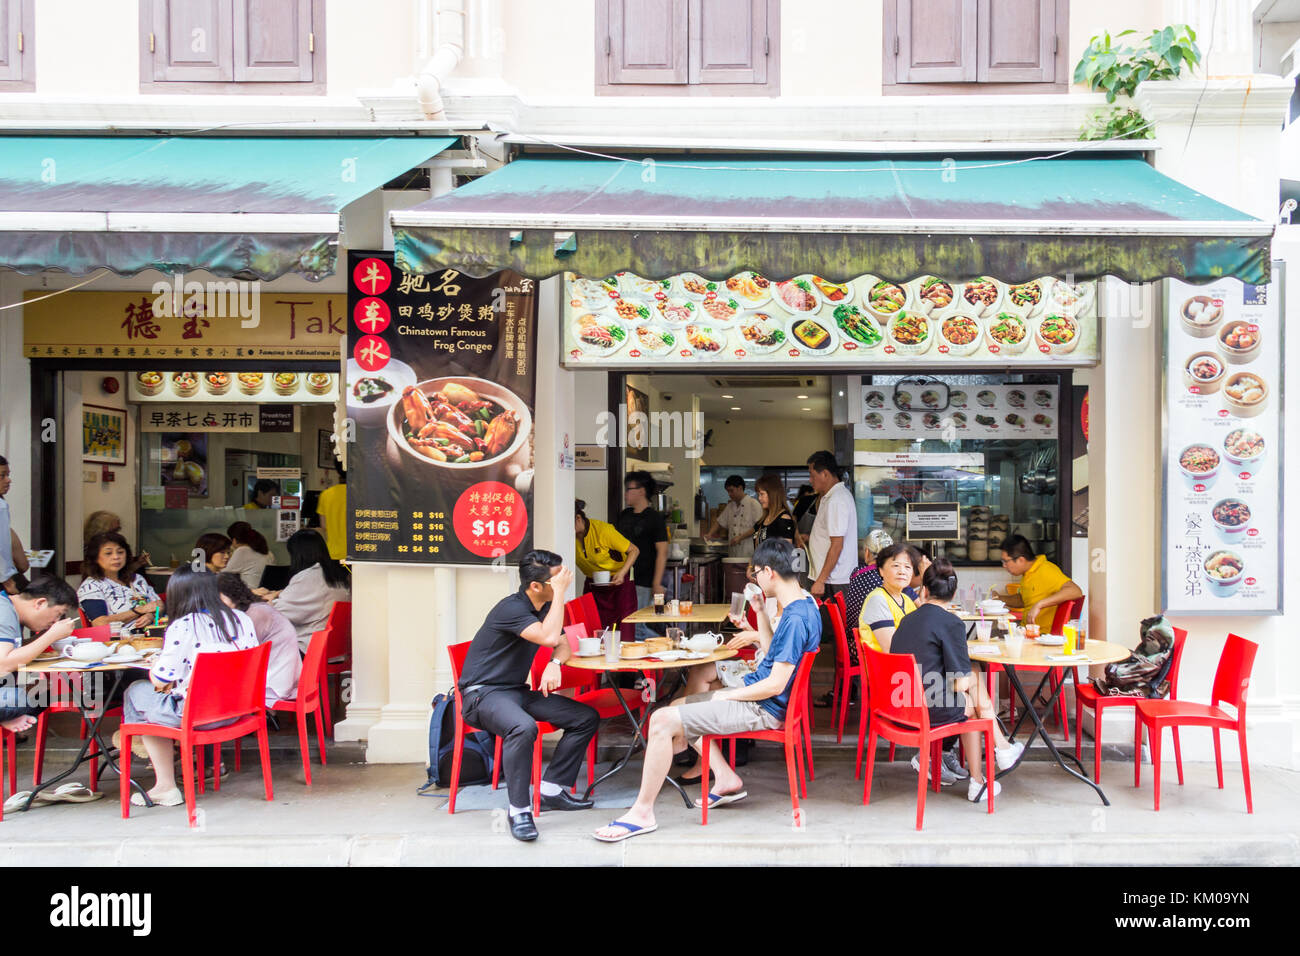 People eating on the street outside a restaurant in Smith street, Chinatown, SIngapore Stock Photo